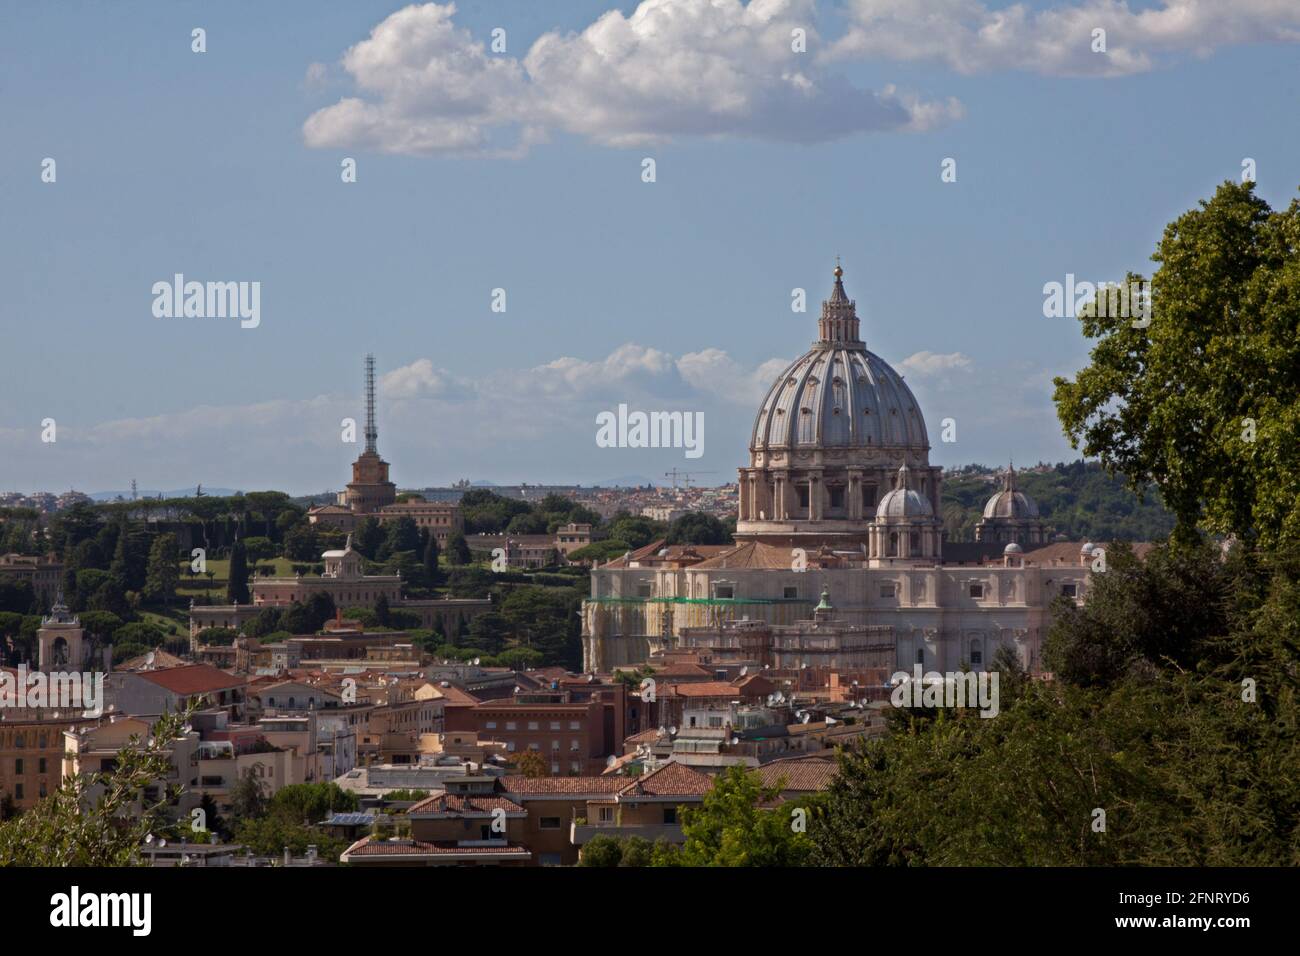 View of St. Peter's Basilica and the Vatican Stock Photo